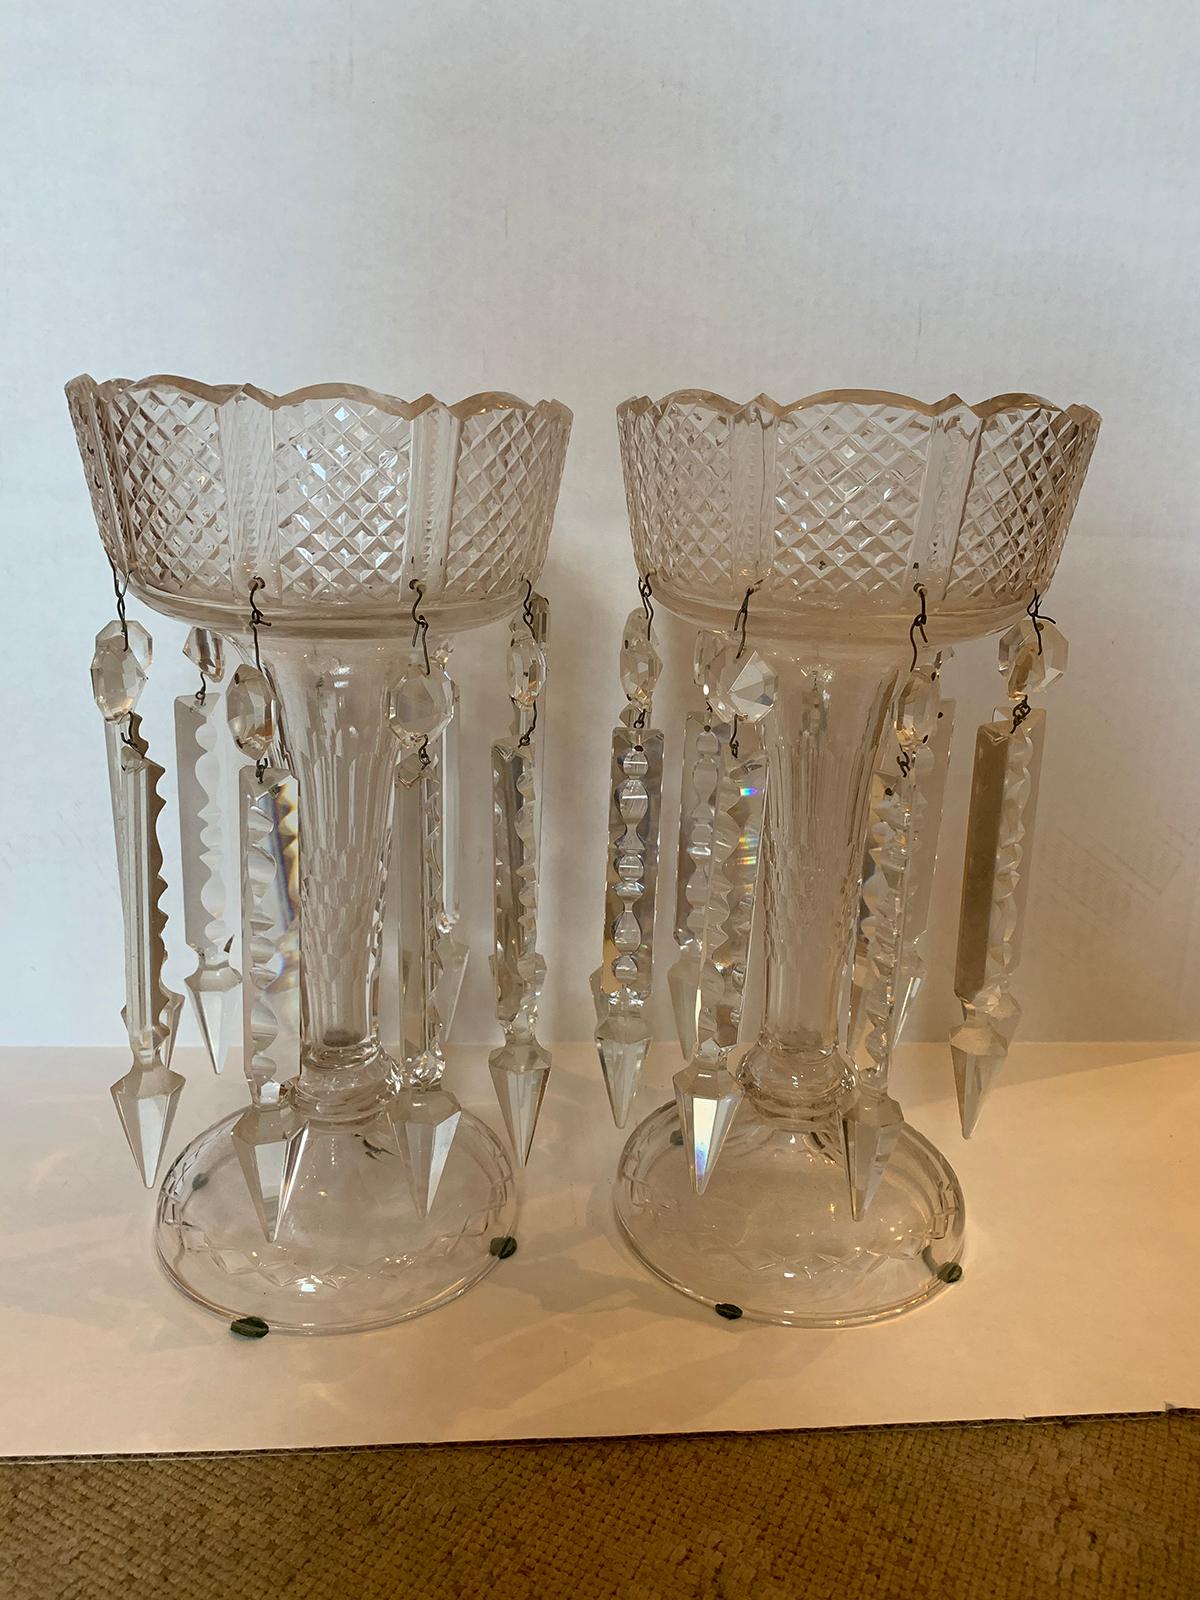 Pair of 19th century American clear cut crystal mantel lusters with prisms.